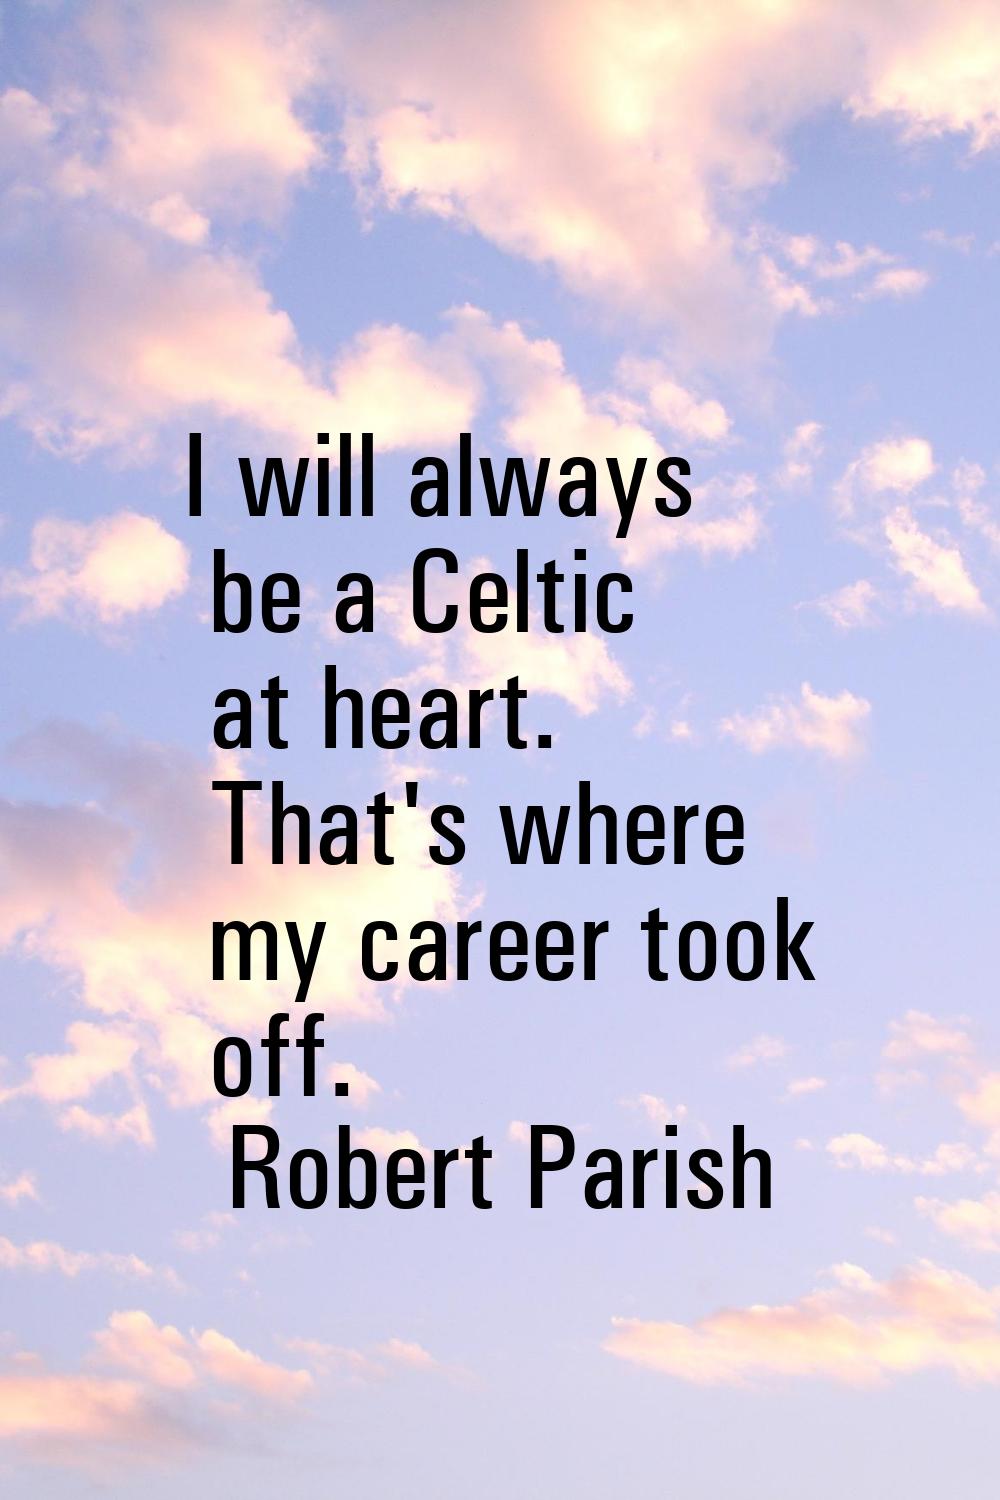 I will always be a Celtic at heart. That's where my career took off.